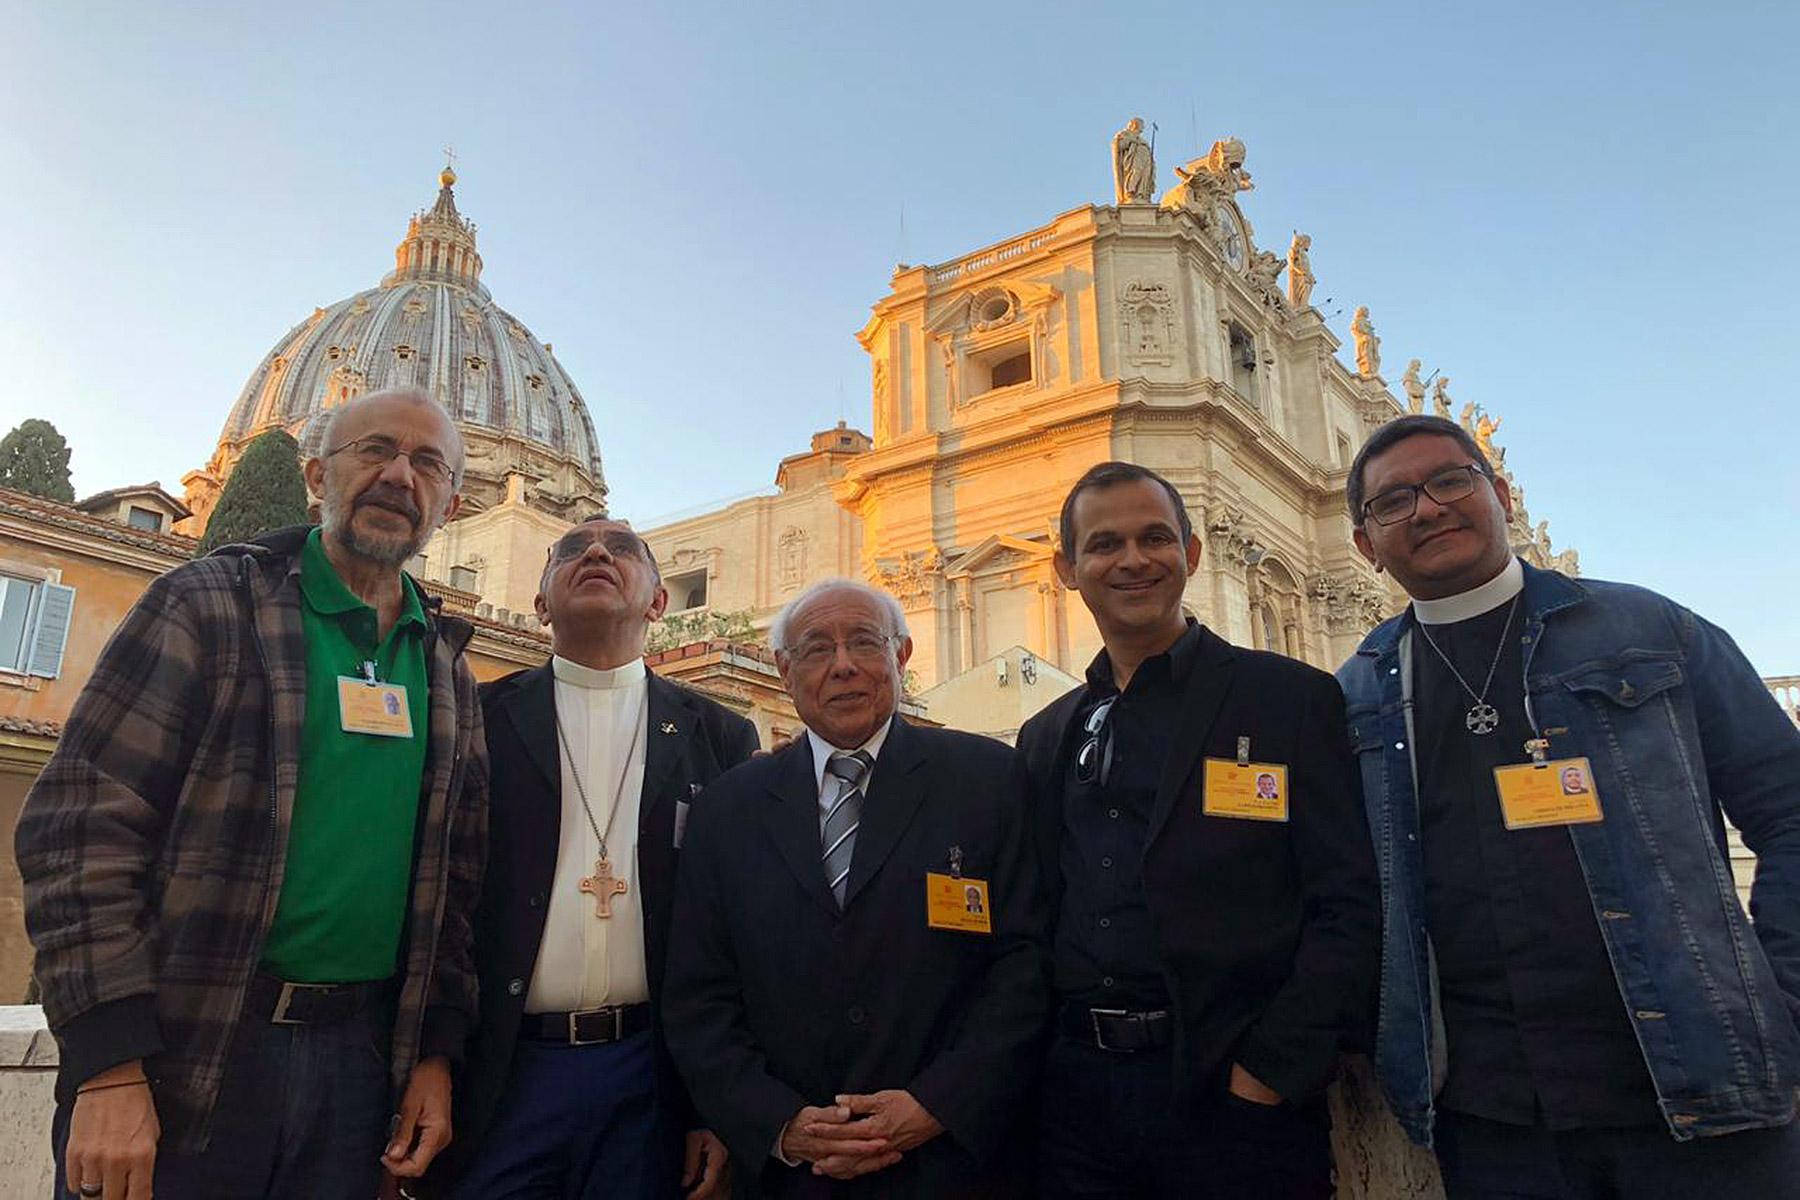 Rev. Nicolau Nascimento de Paiva (left of photo) together with other ecumenical delegates to the Vatican Synod in front of St Peterâs Basilica. Photo: Robert FLOCK